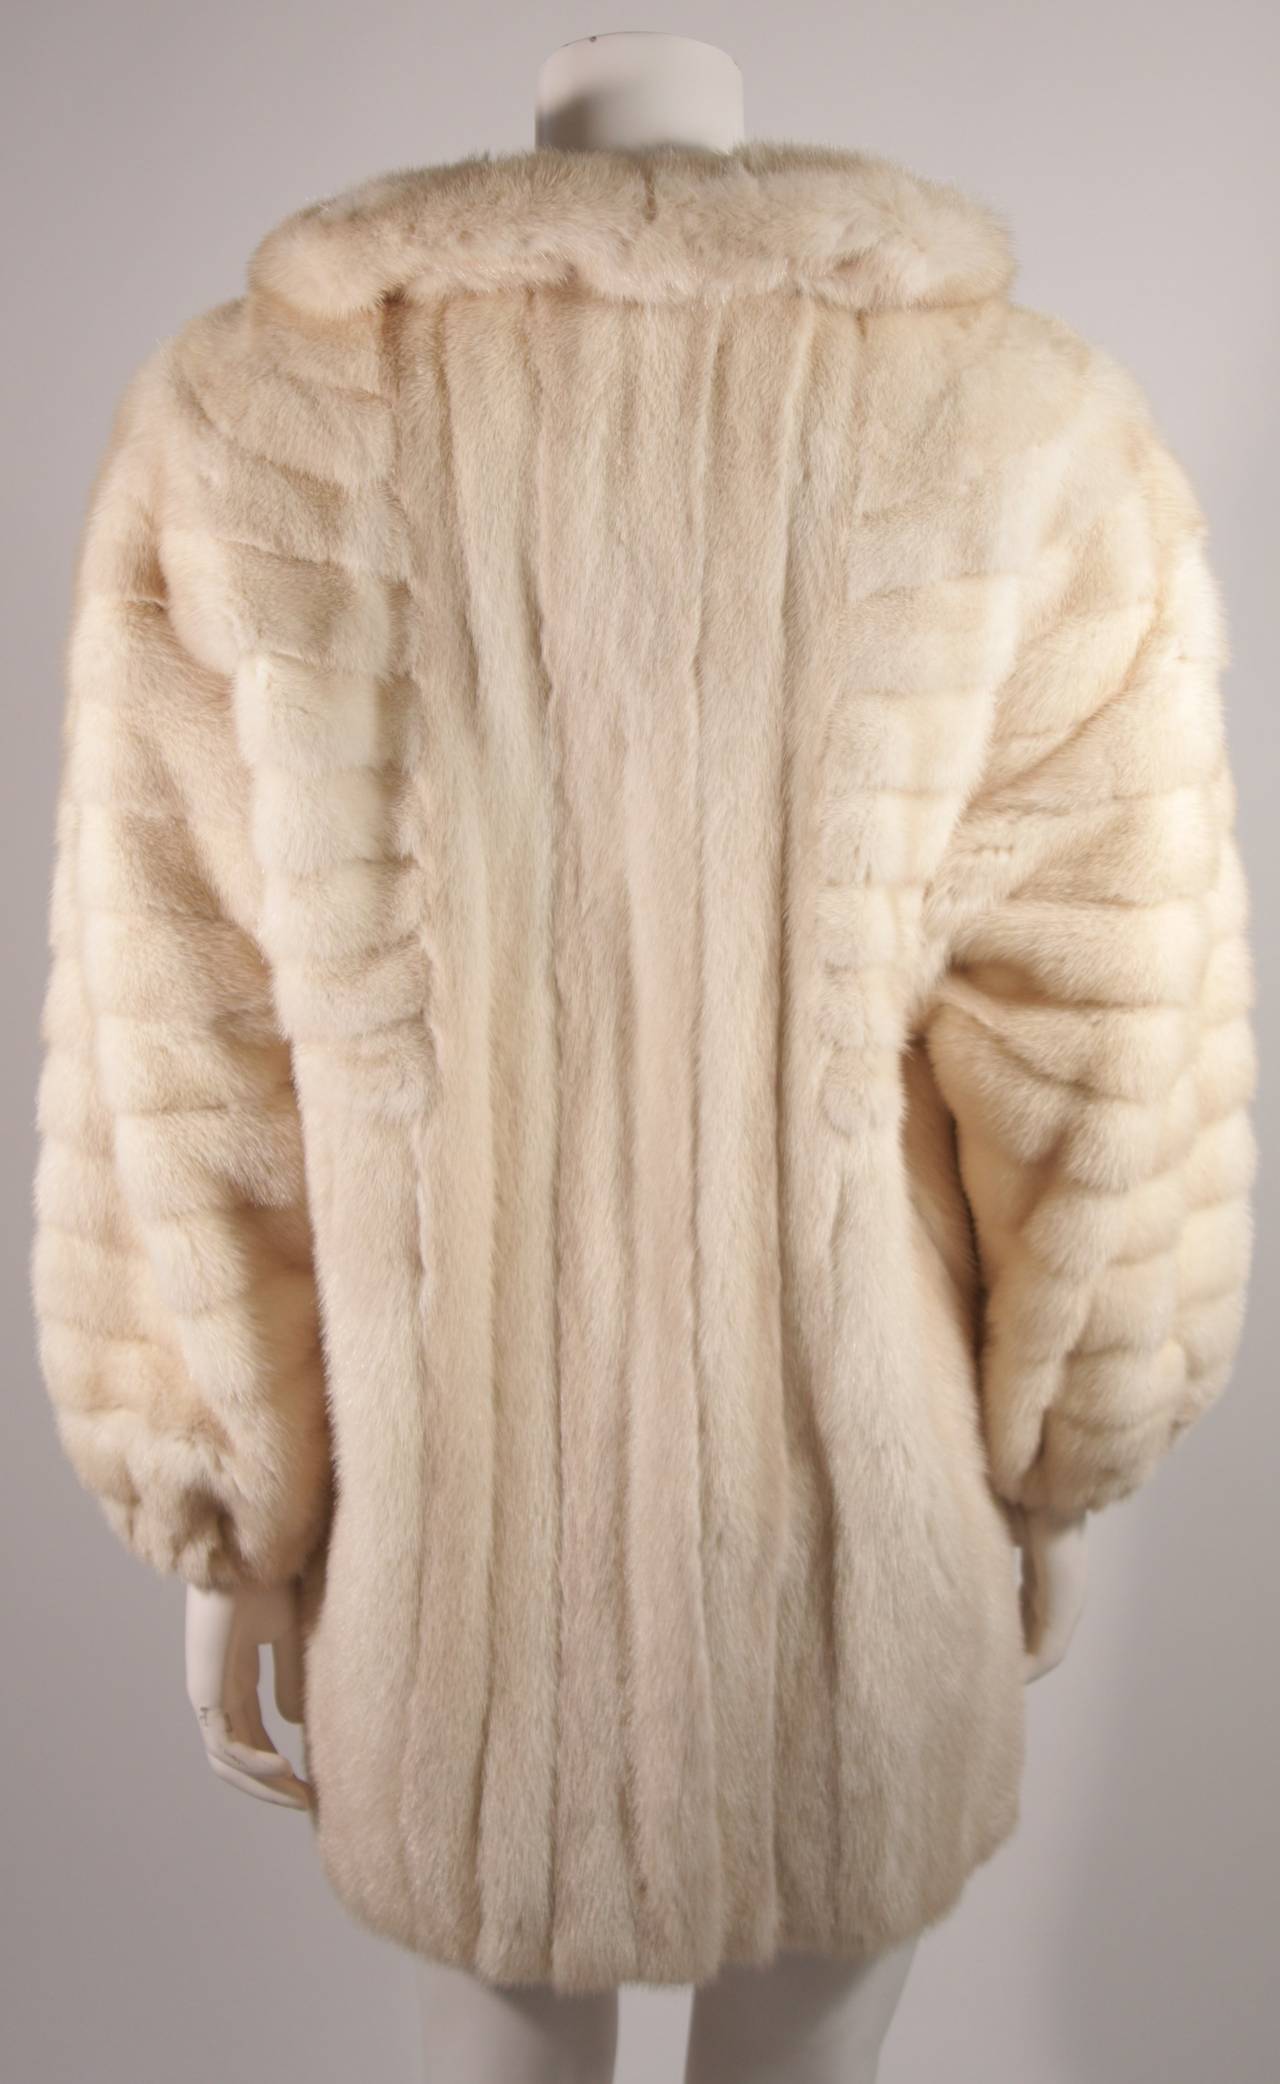 Galanos Ivory Mink Coat with Ruffle Tie Collar and Full Sleeves & Stretch cuff For Sale 1